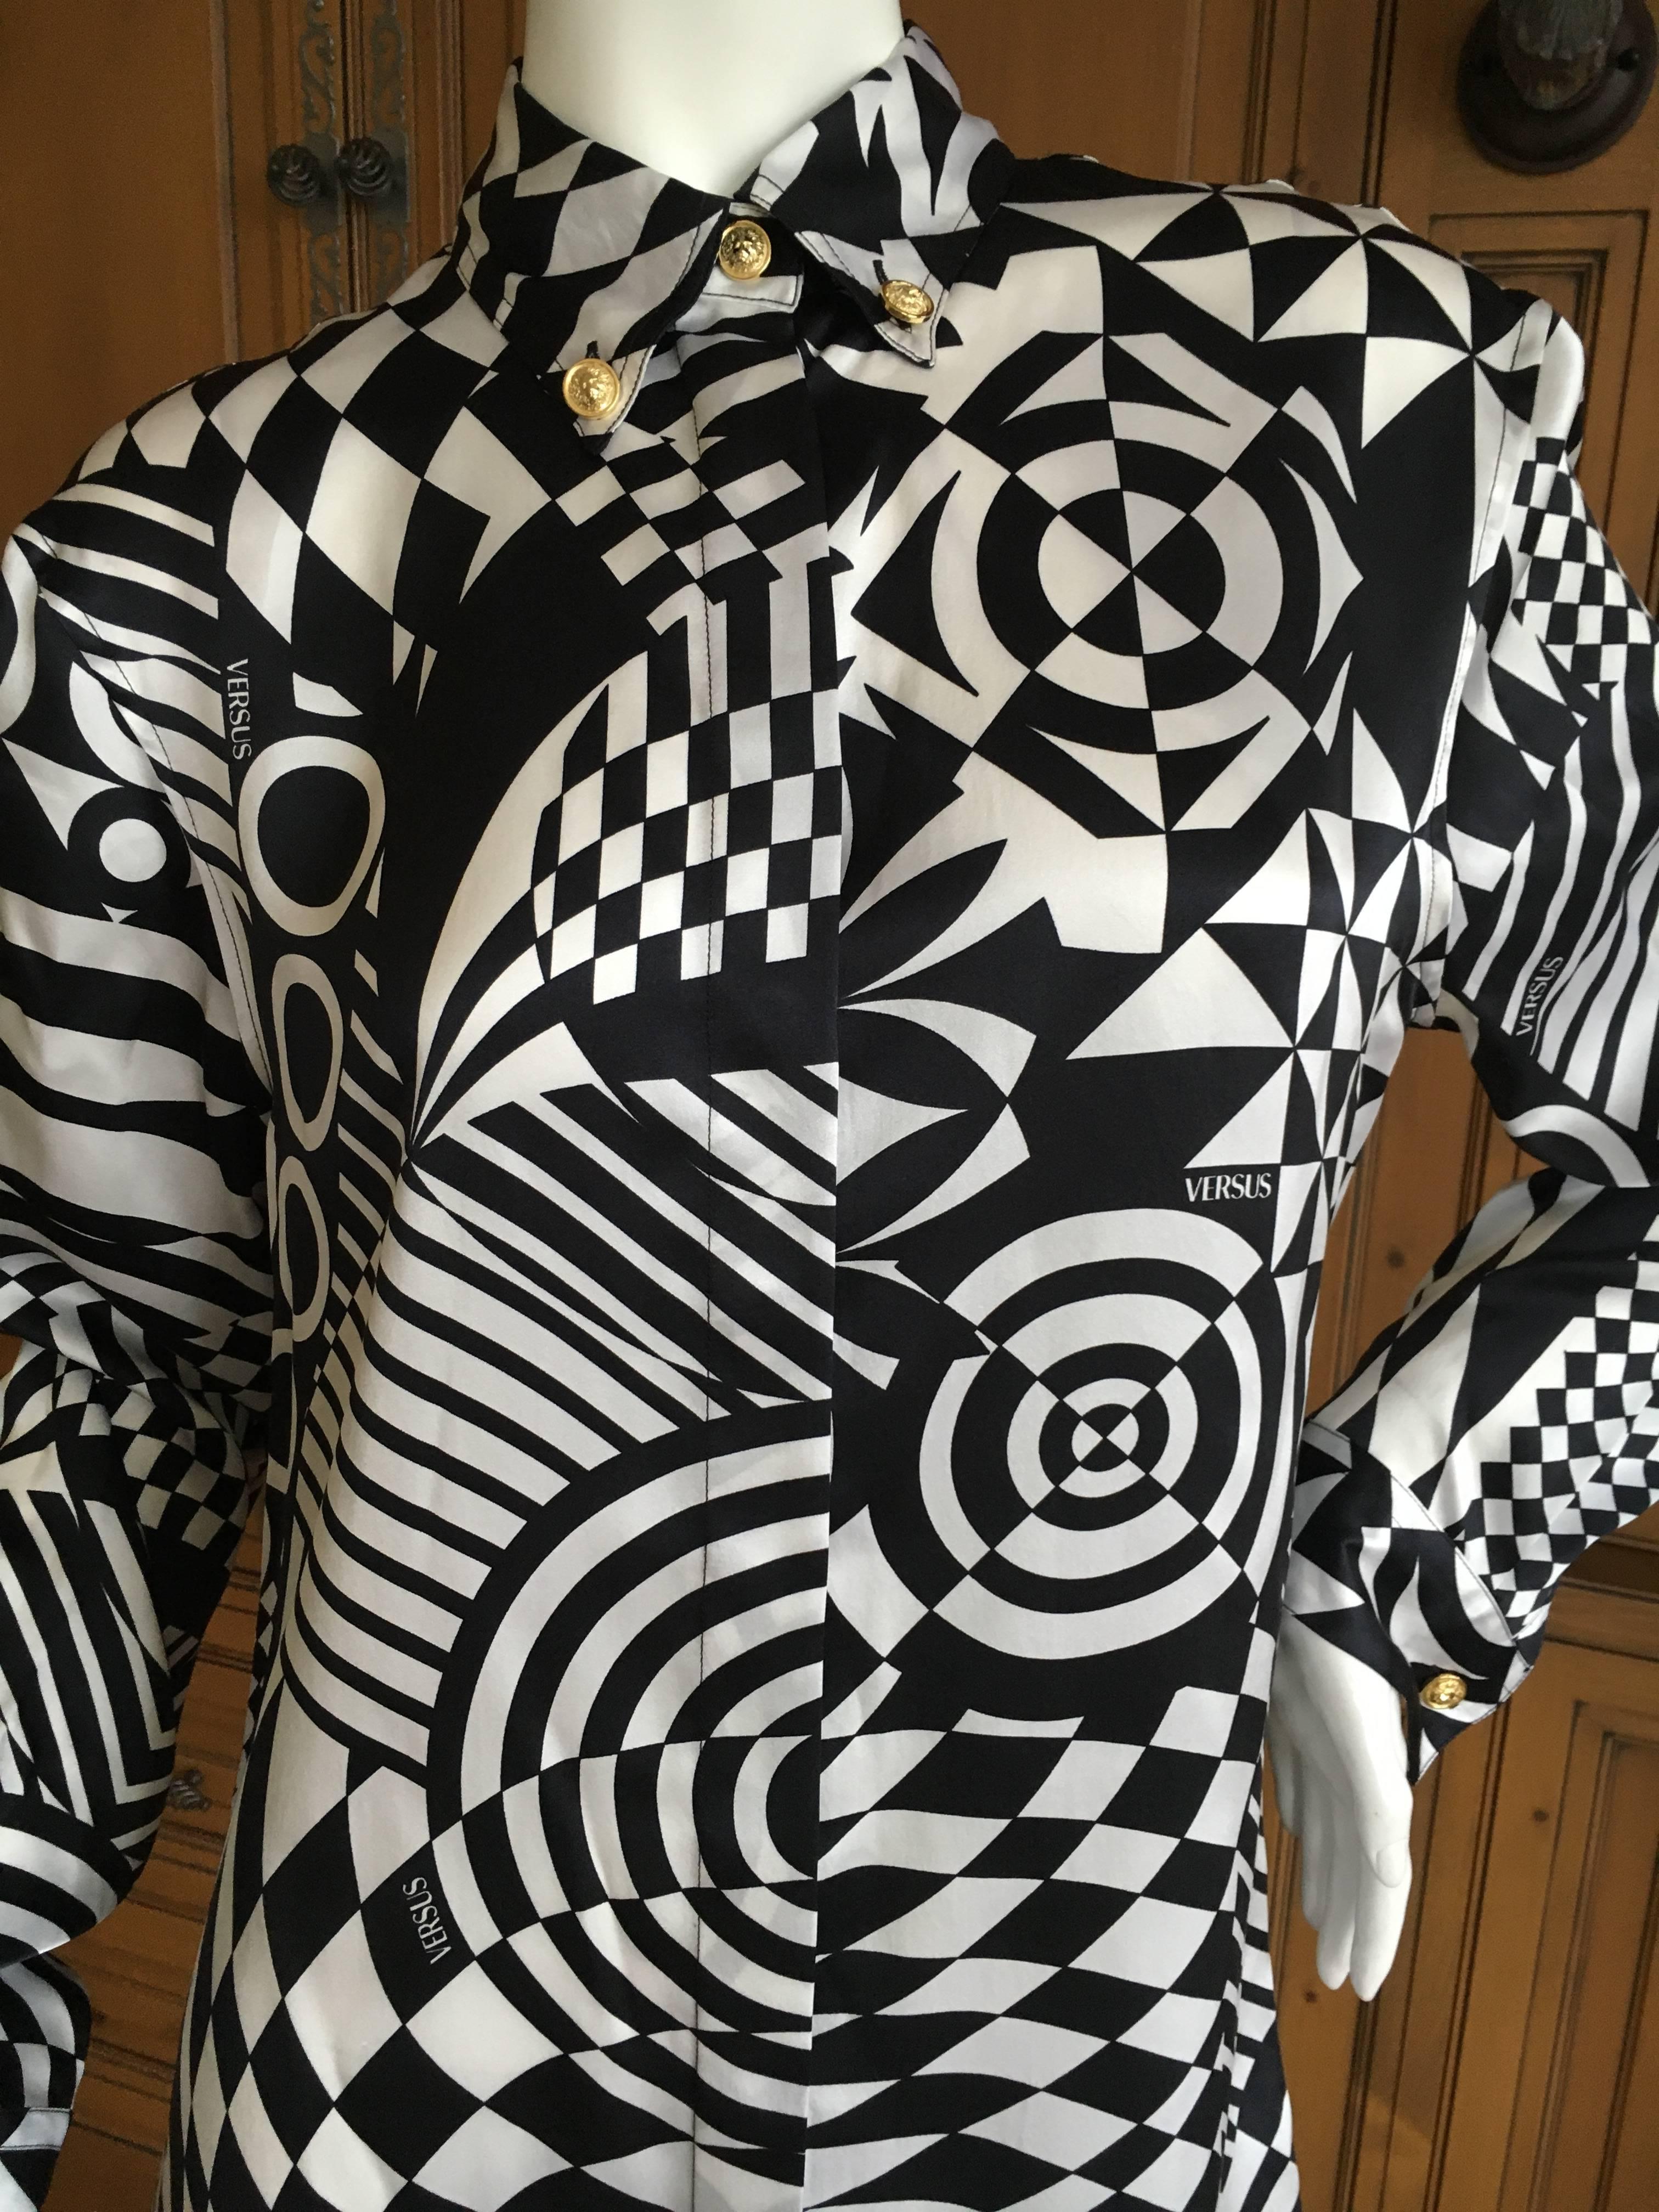 Versace Op Art Silk Blouse by Versus In New Condition For Sale In Cloverdale, CA